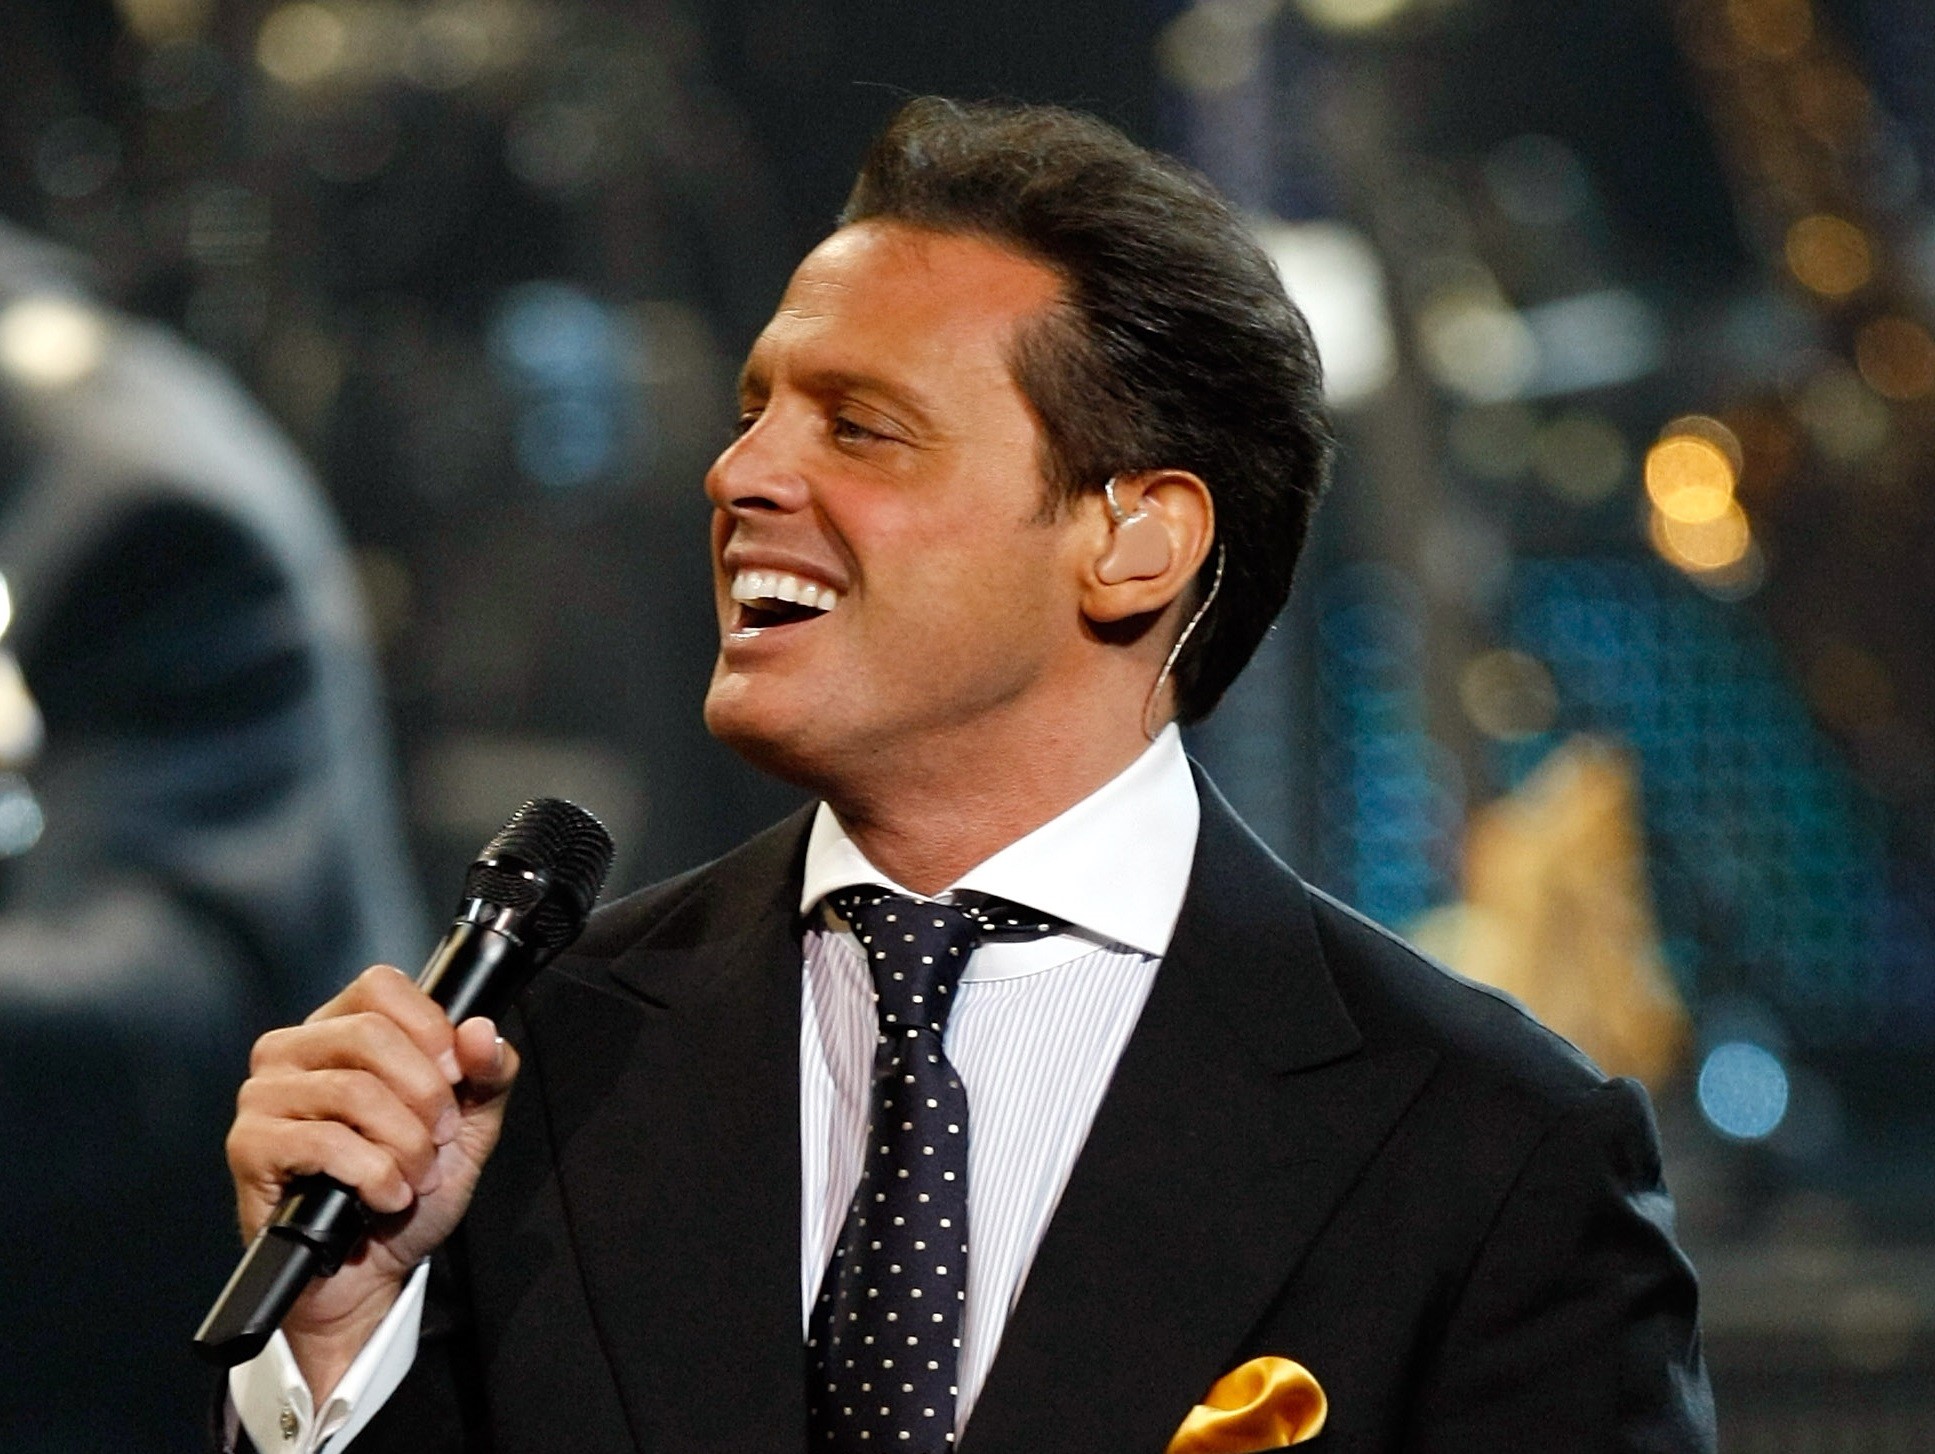 Luis Miguel Net Worth [2022]: How Did He Achieve This Wealth?